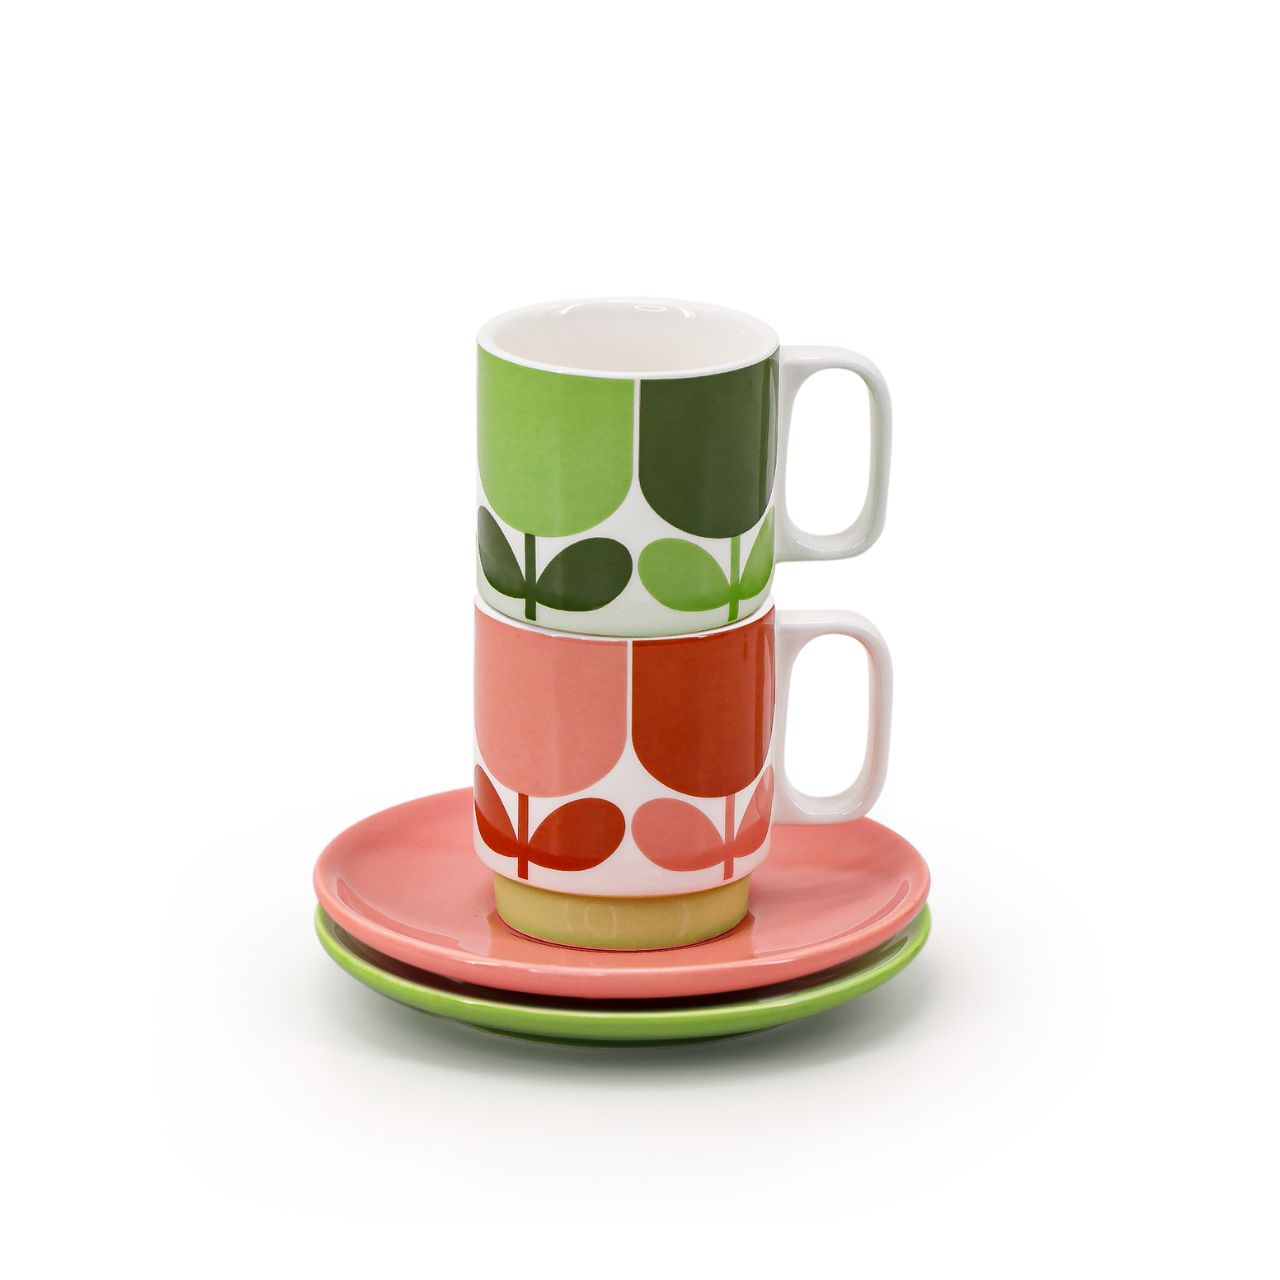 Orla Kiely Set 2 Espresso Cup & Saucer - Block Flower DESIGNED IN THE UK BY ORLA KIELY: This set of two espresso cup and saucer has a unique 'Block Flower' print.  Each cup is stamped with an authentic Orla Kiely logo.